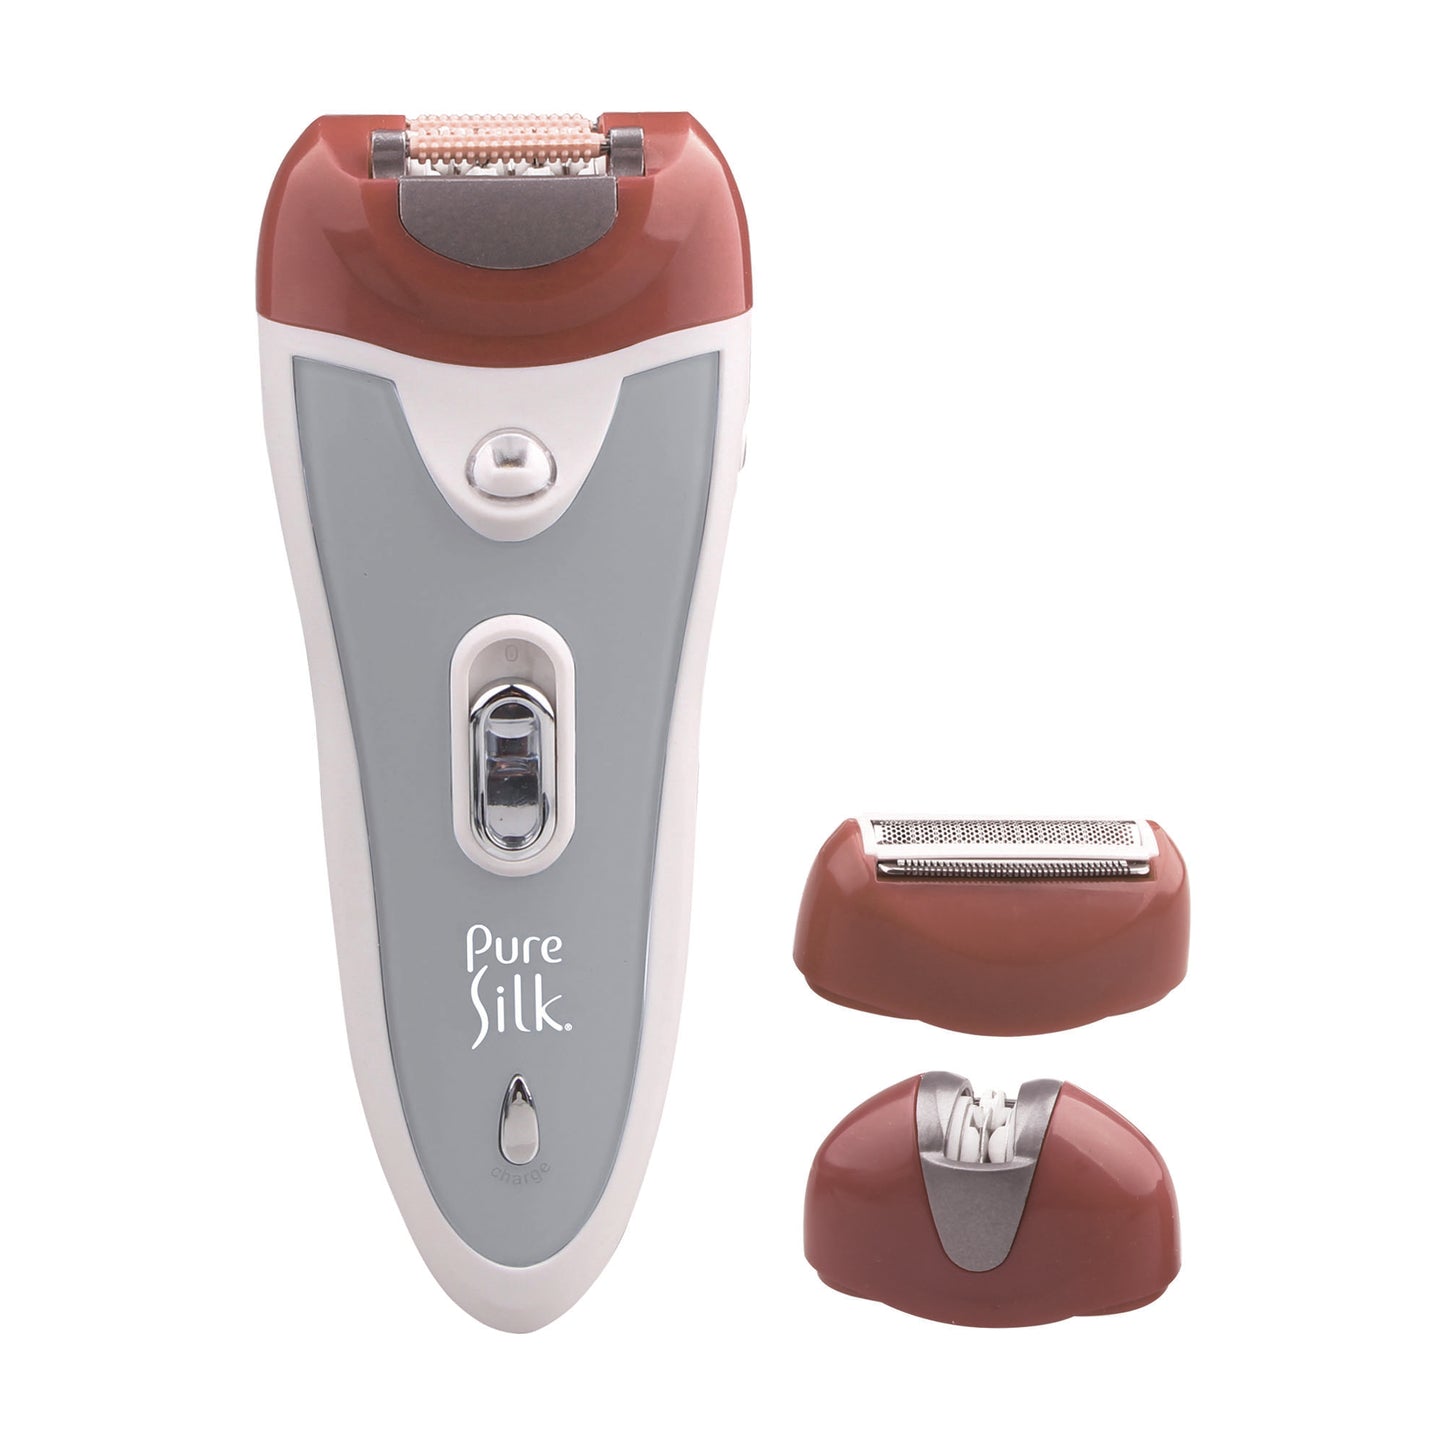 Pure Silk® Rechargeable 3 in 1 Epilator & Shaver